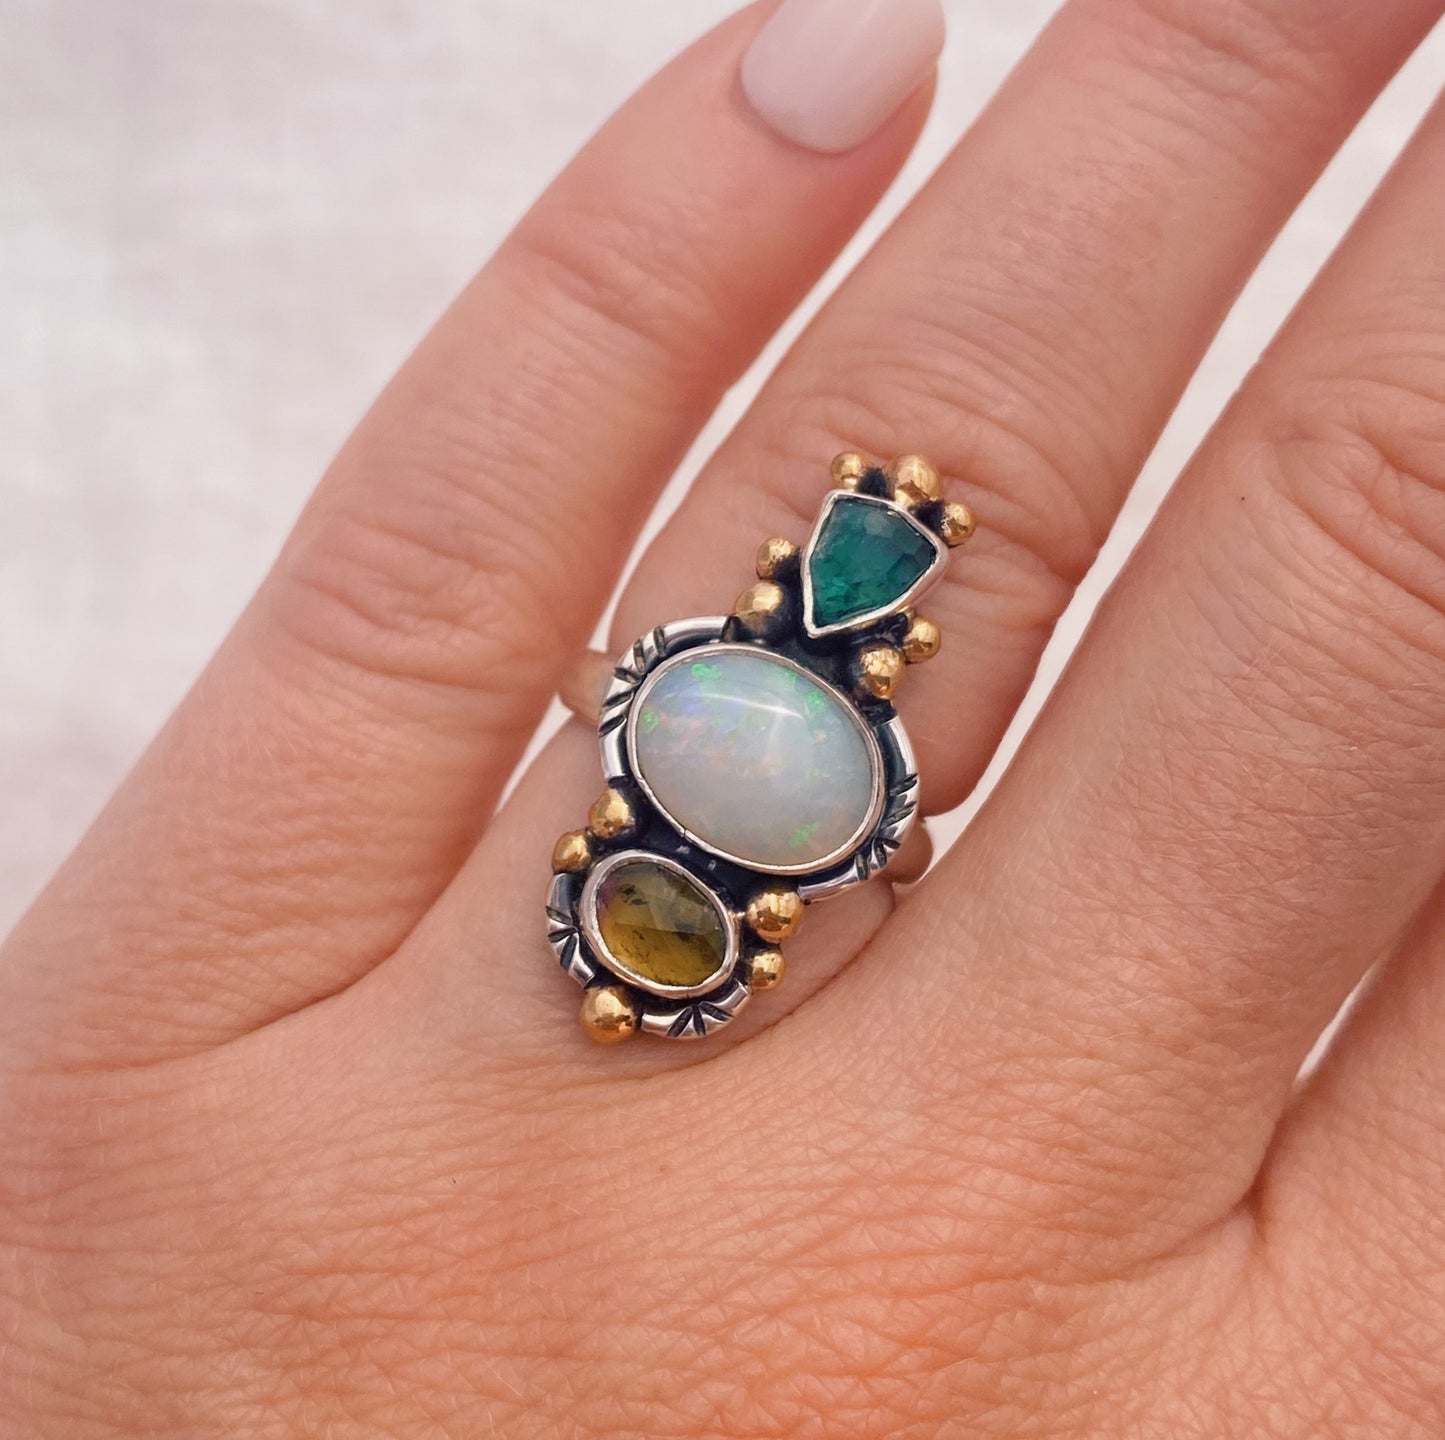 Trine Ring (B) ◇ Faceted Tourmaline + Australian Opal + Faceted Tourmaline ◇ Size 6.5